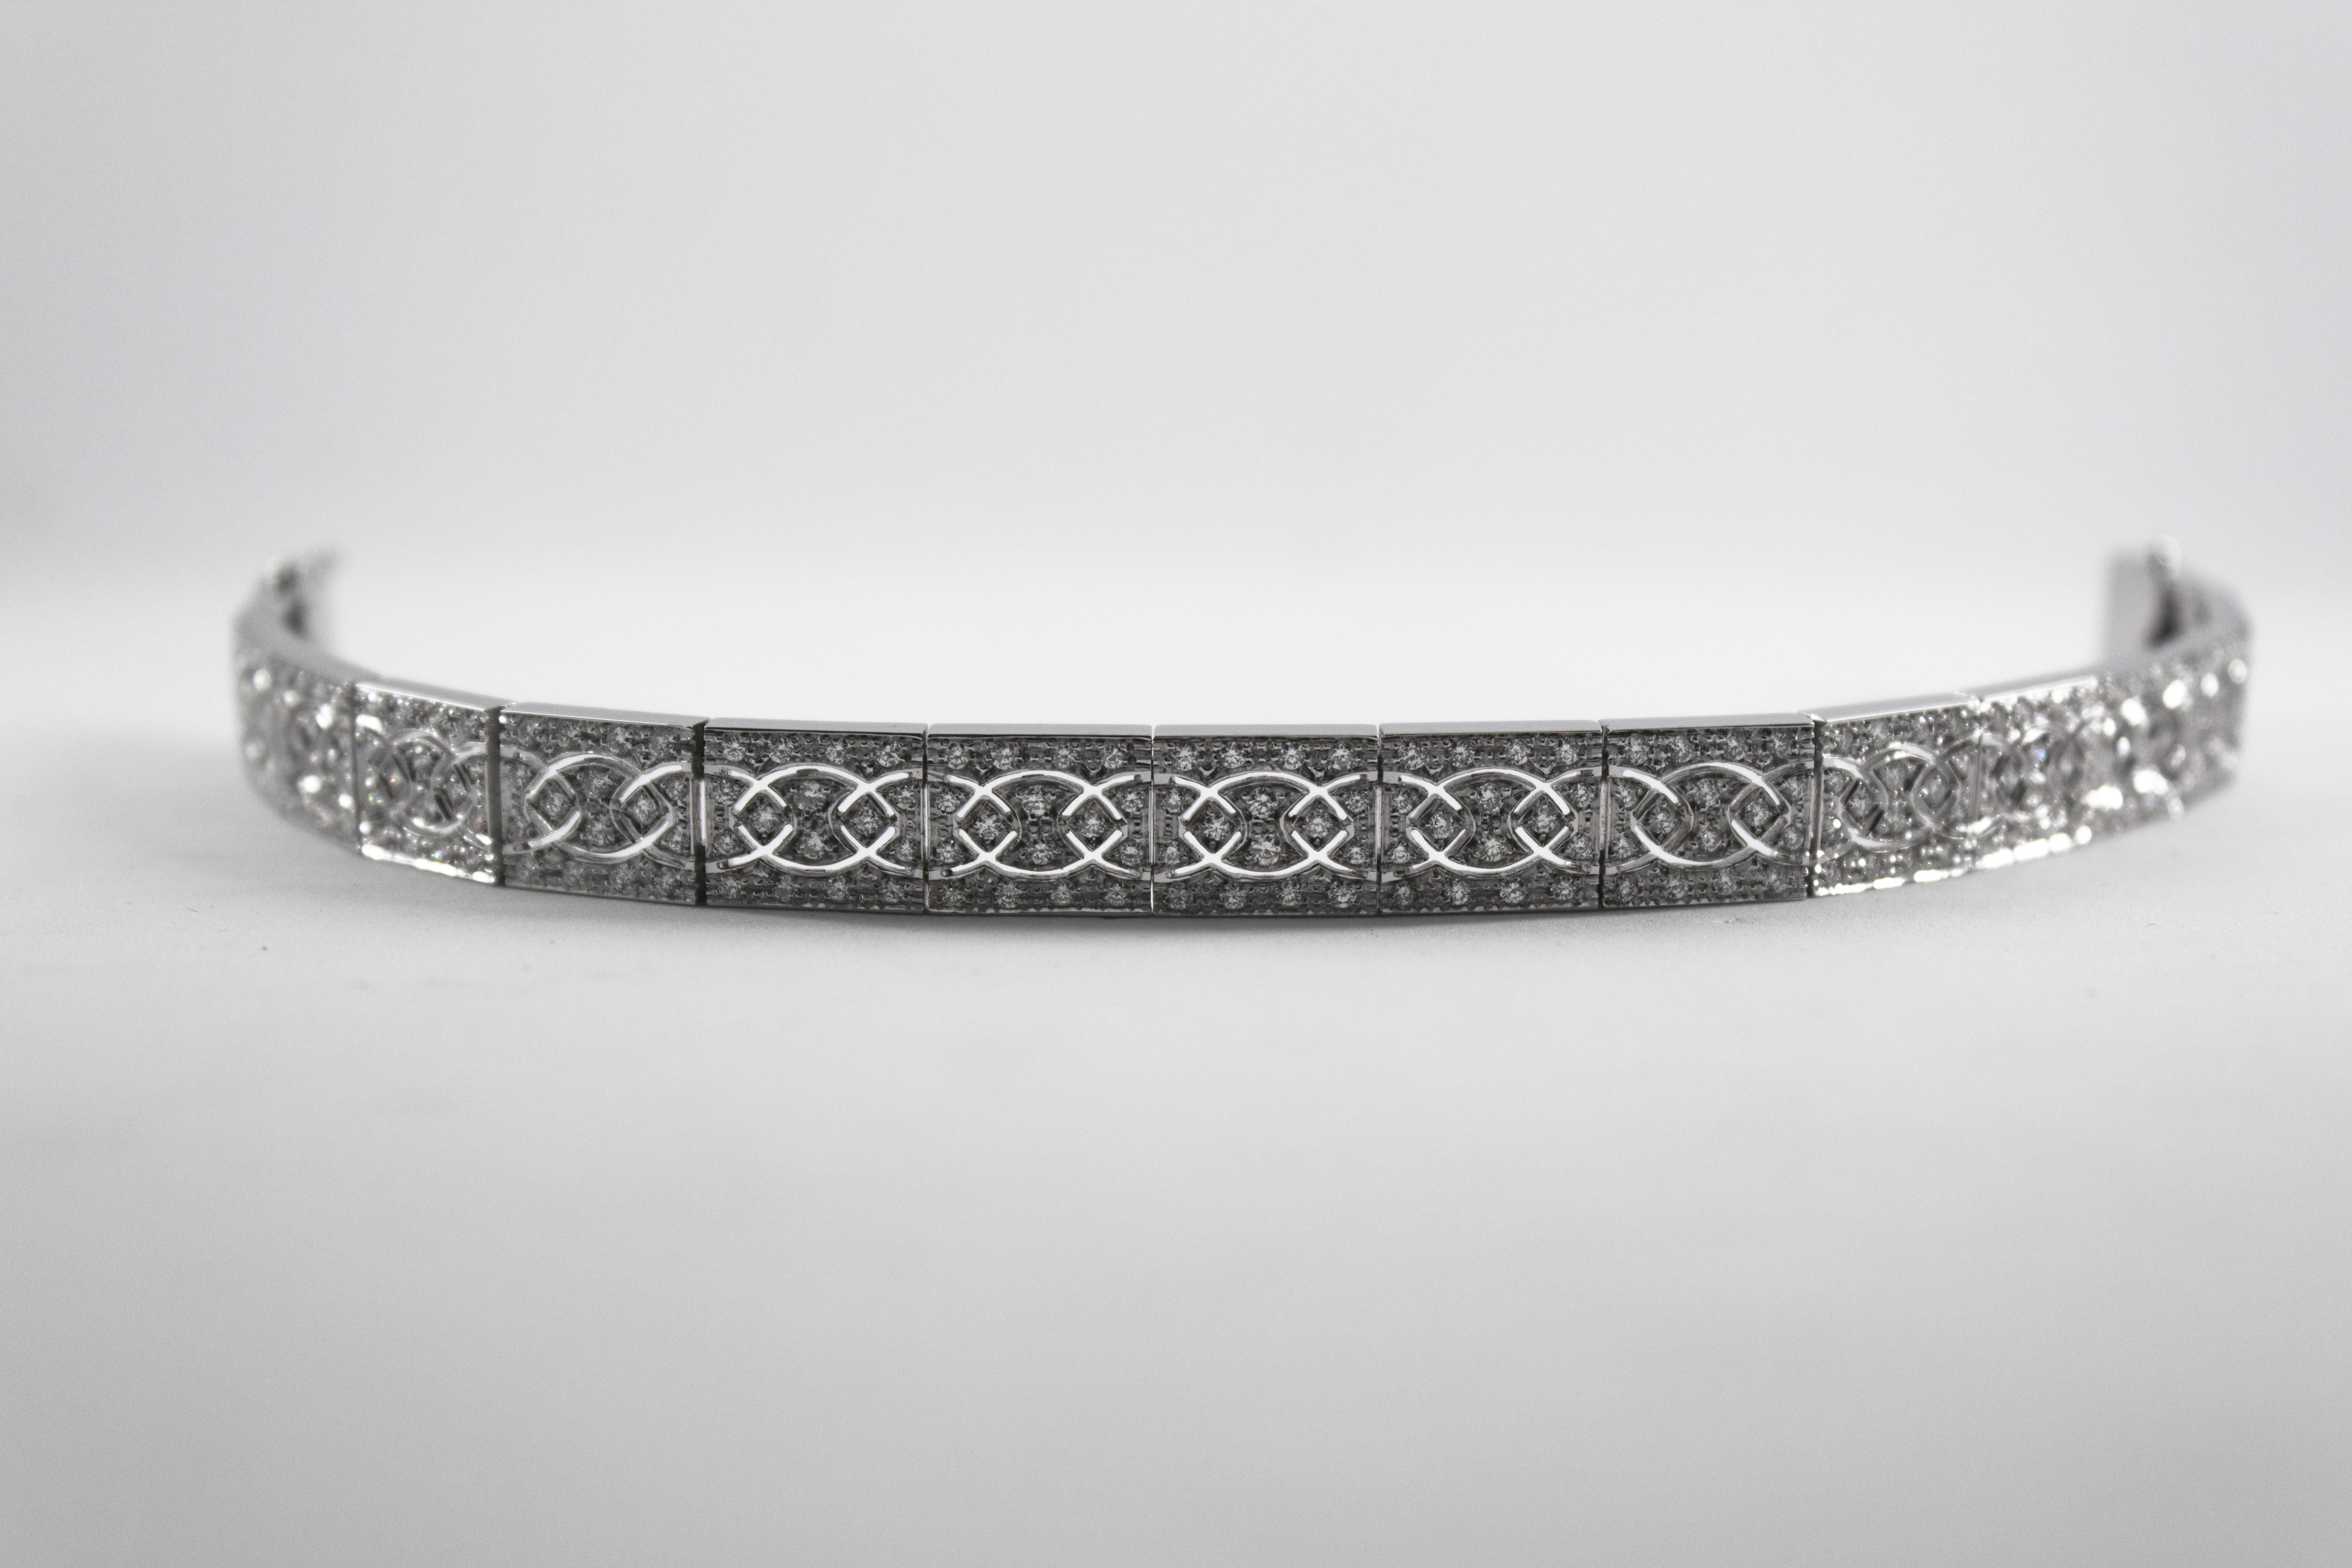 This Bracelet is made of 18K White Gold.
This Bracelet has 2.70 Carats of White Diamonds.
This Bracelet is inspired by Renaissance Style.
We're a workshop so every piece is handmade, customizable and resizable.